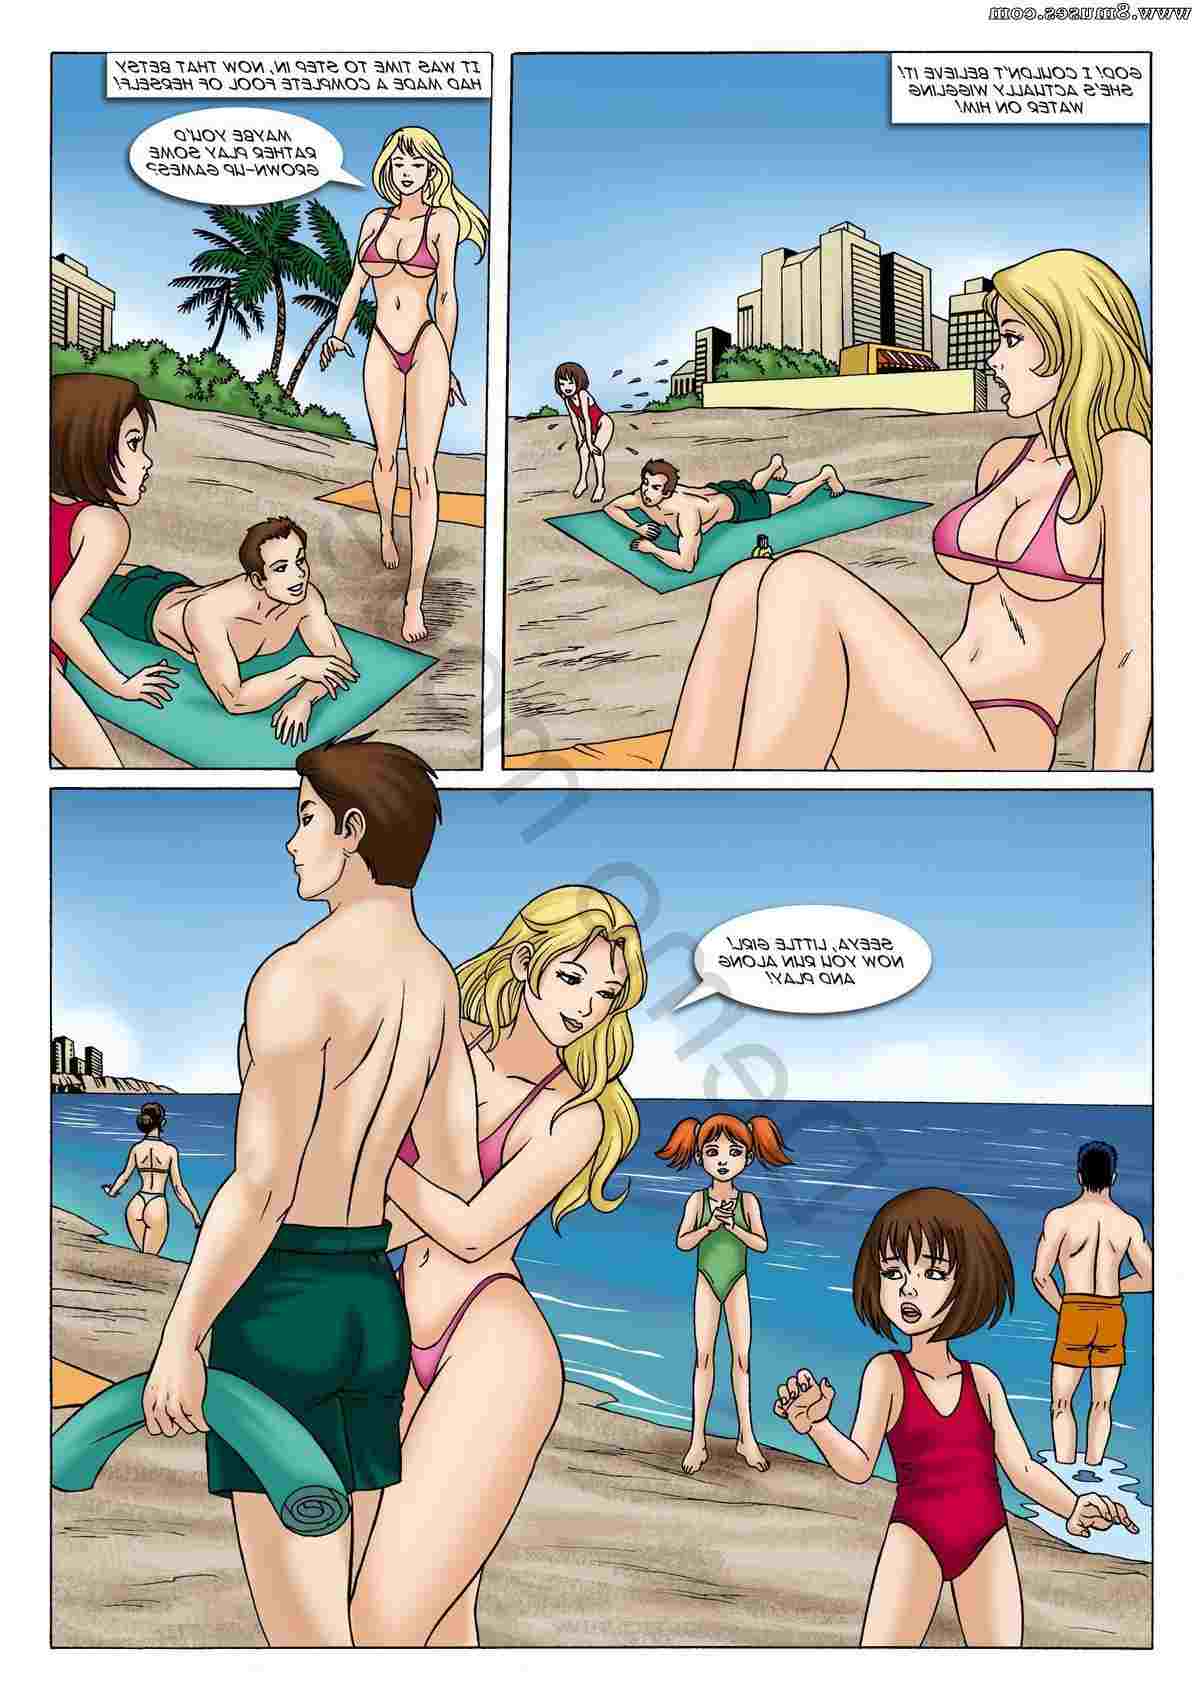 DreamTales-Comics/A-Tale-of-Two-Sisters A_Tale_of_Two_Sisters__8muses_-_Sex_and_Porn_Comics_15.jpg